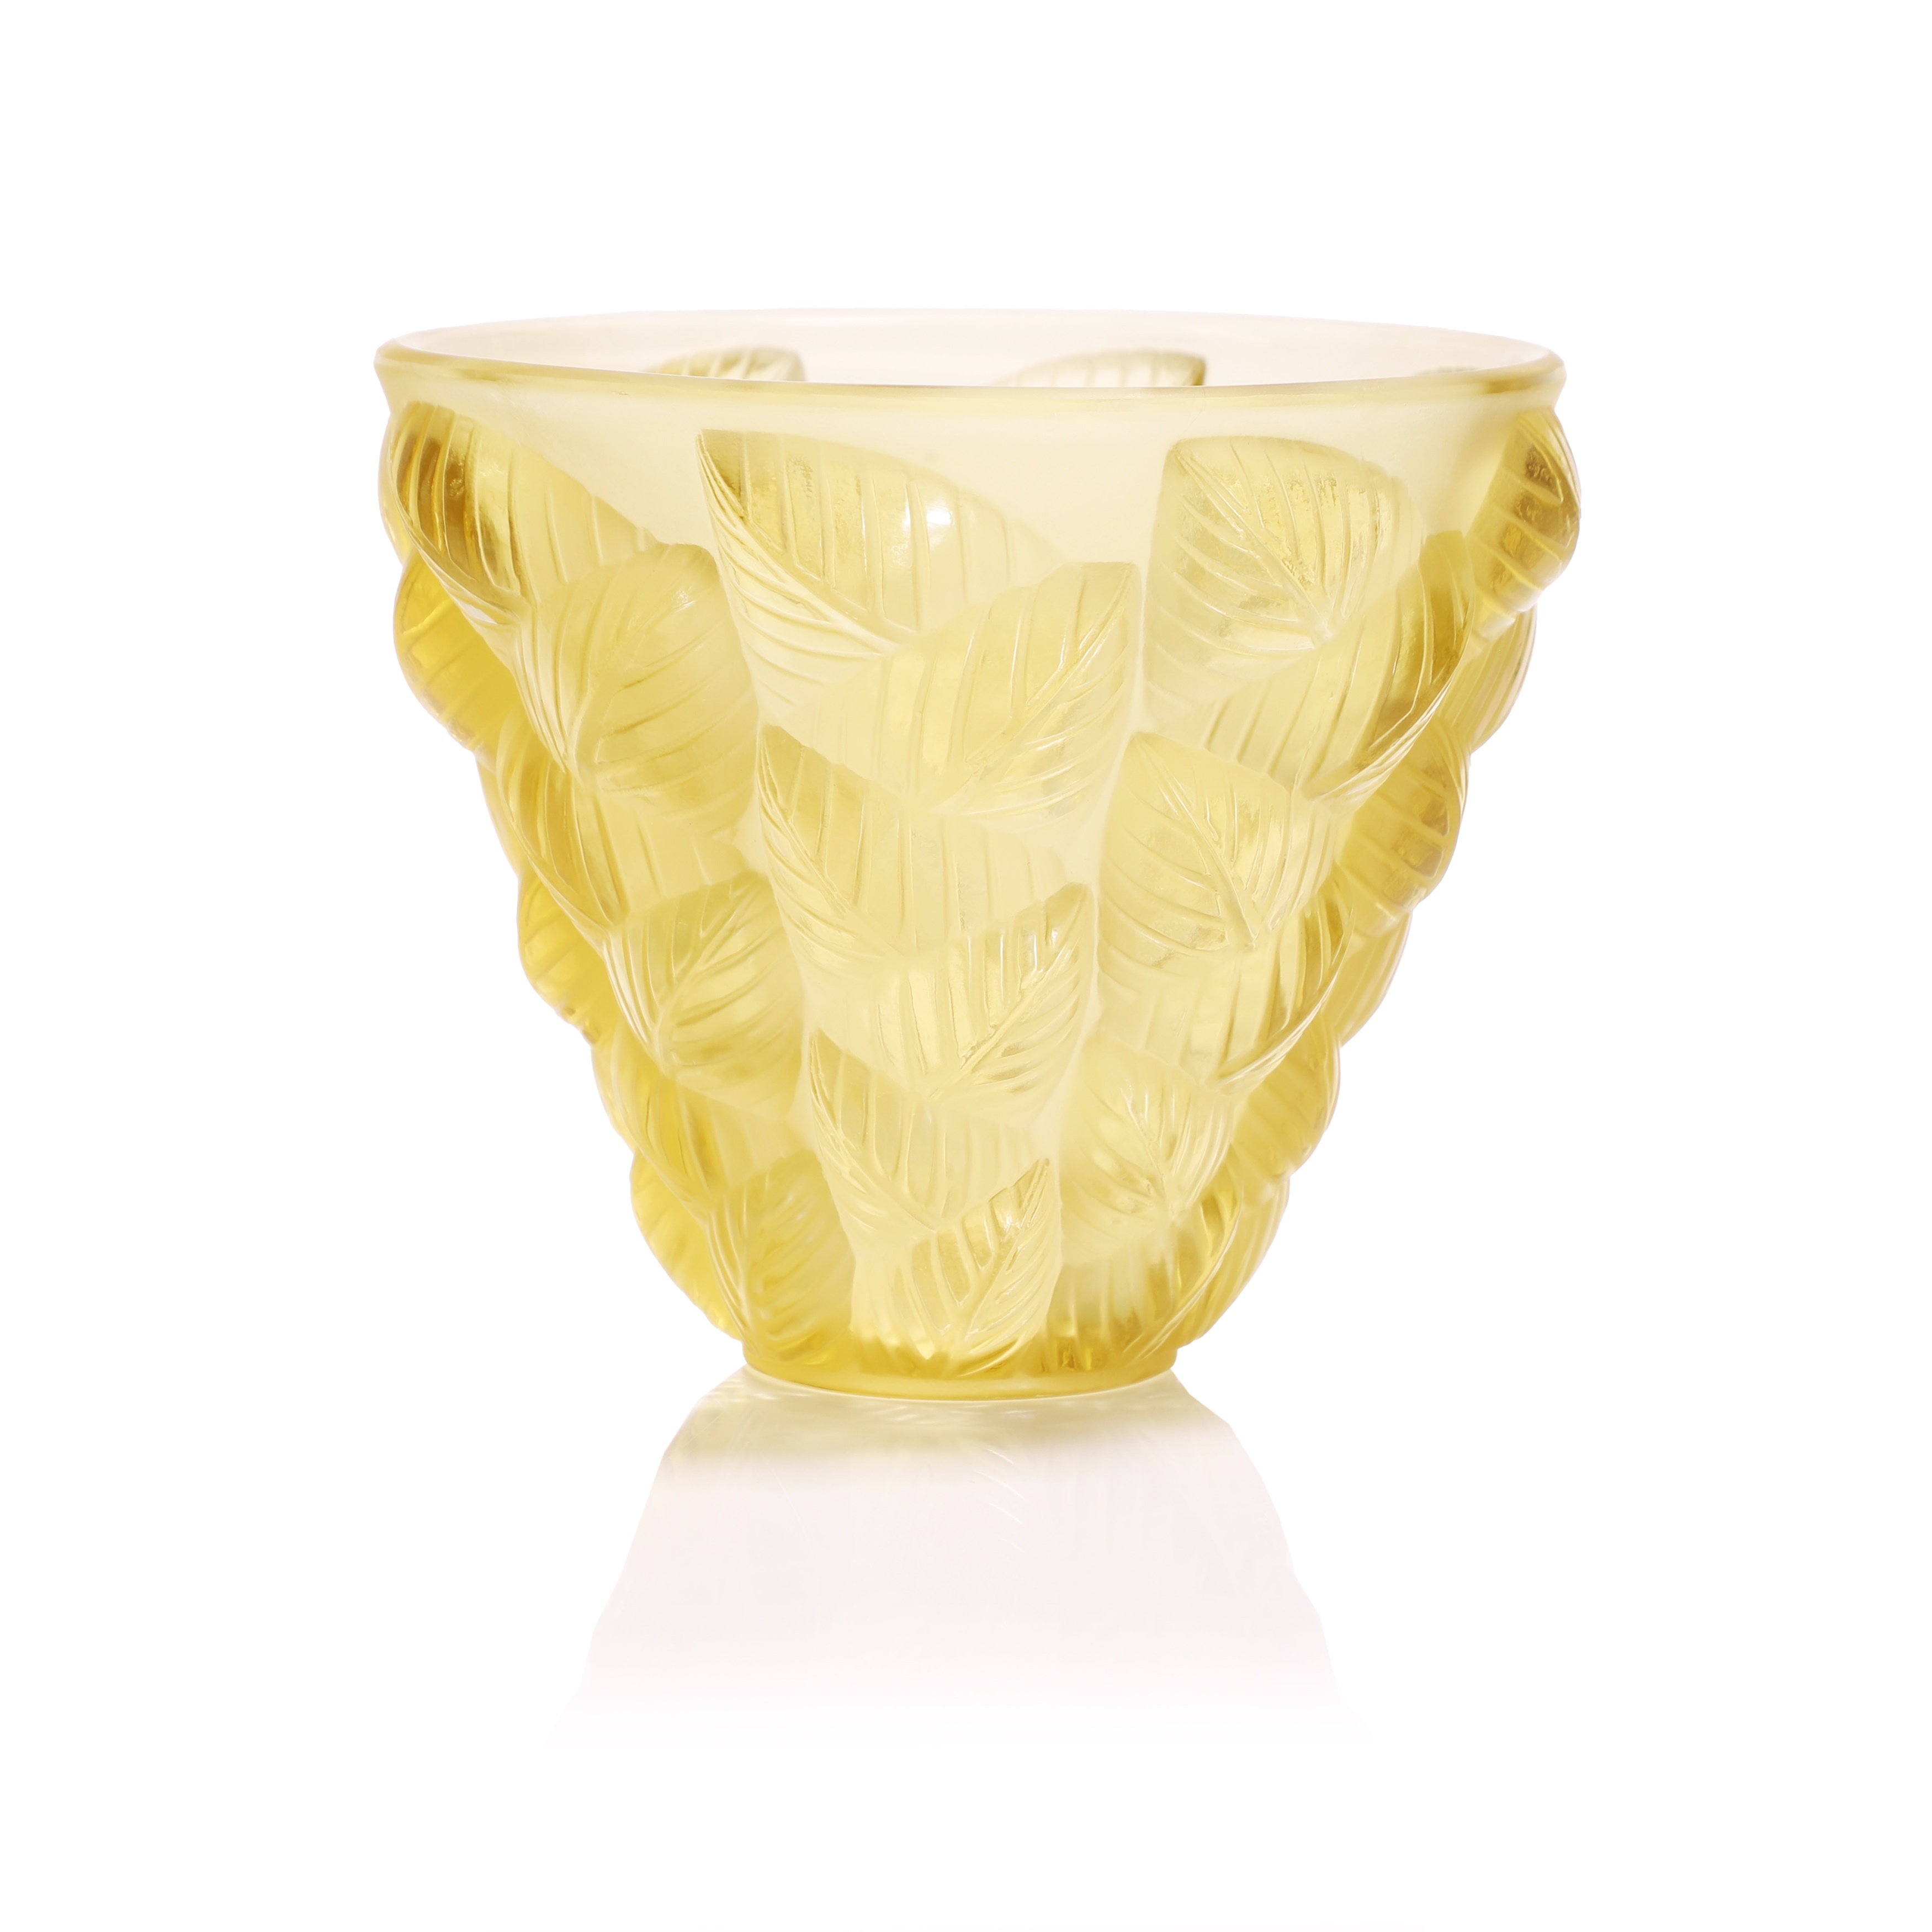 René Lalique (French, 1860-1945) a 'Moissac' vase, No. 992, designed in 1927, pale amber glass, wheel engraved 'R LALIQUE FRANCE', 13.1cm high (£1,000-1,500)